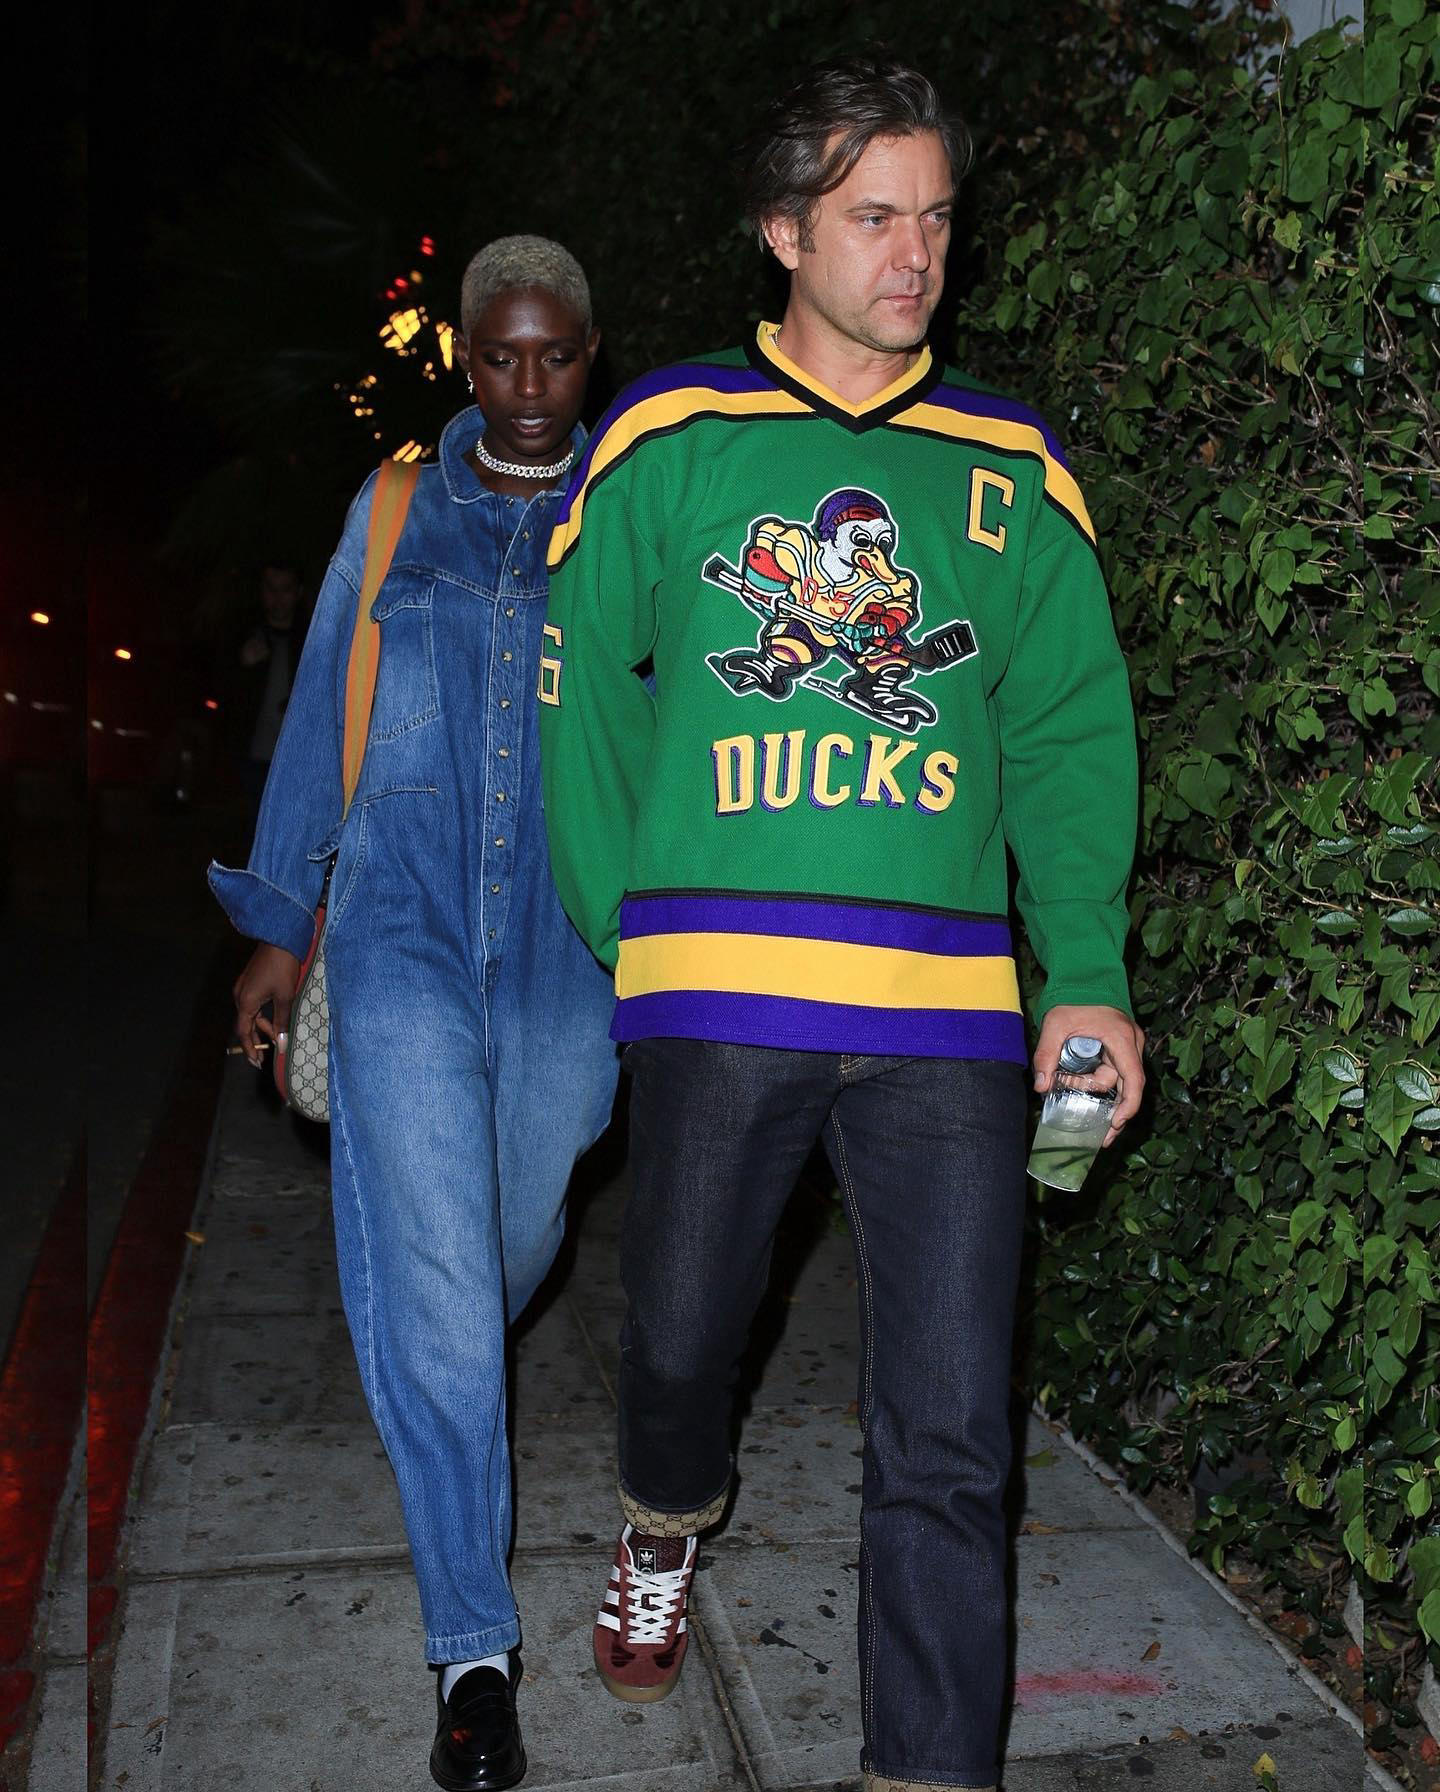 image  1 Just Jared - Joshua Jackson, who starred in the “Mighty Ducks” film franchise, dressed up as a chara